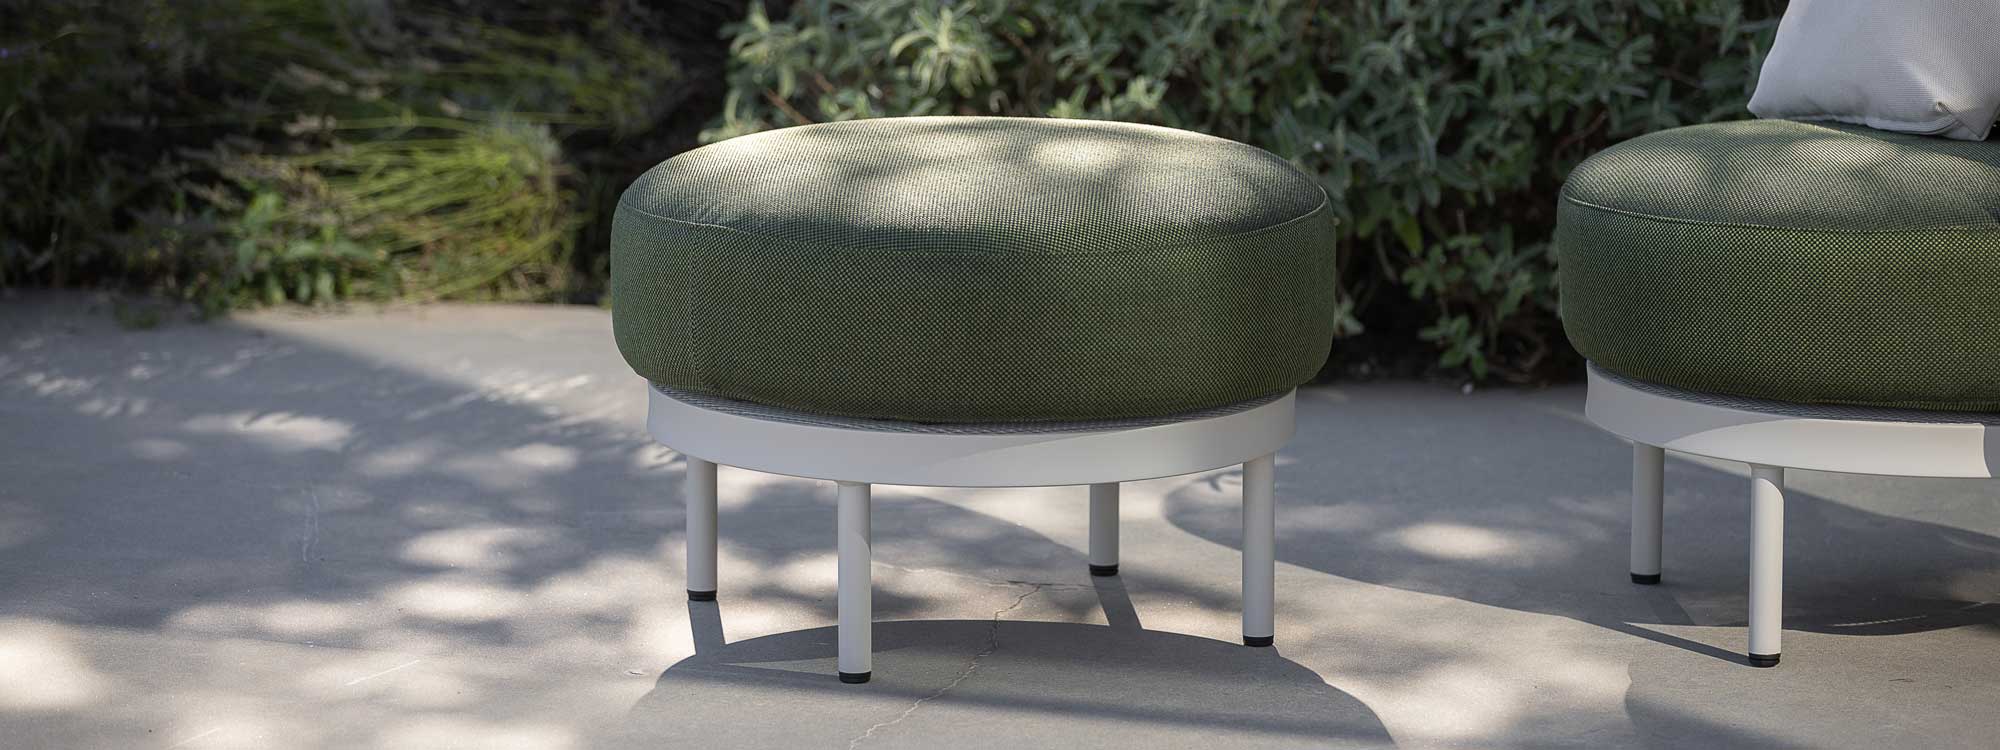 Image of Todus Baza circular garden pouf with white frame and legs and green cushion